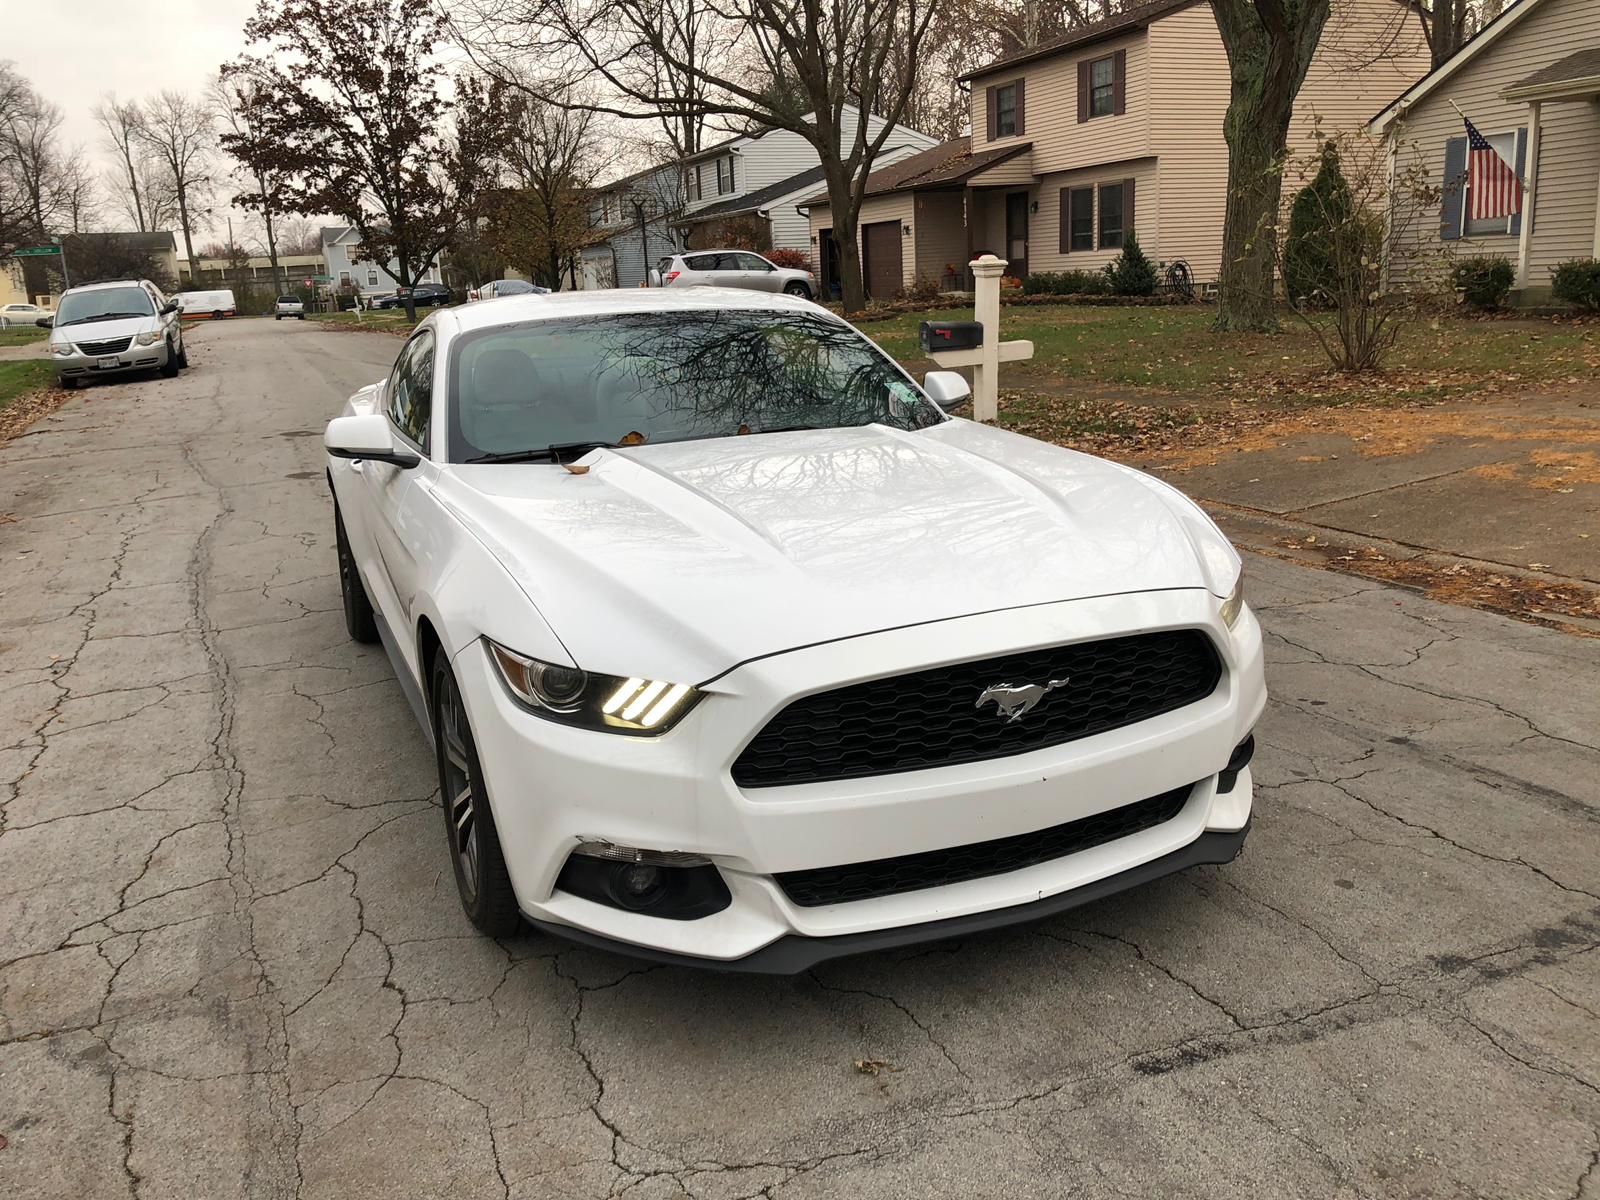 Ford Mustang 2016 mile 11000 title clean